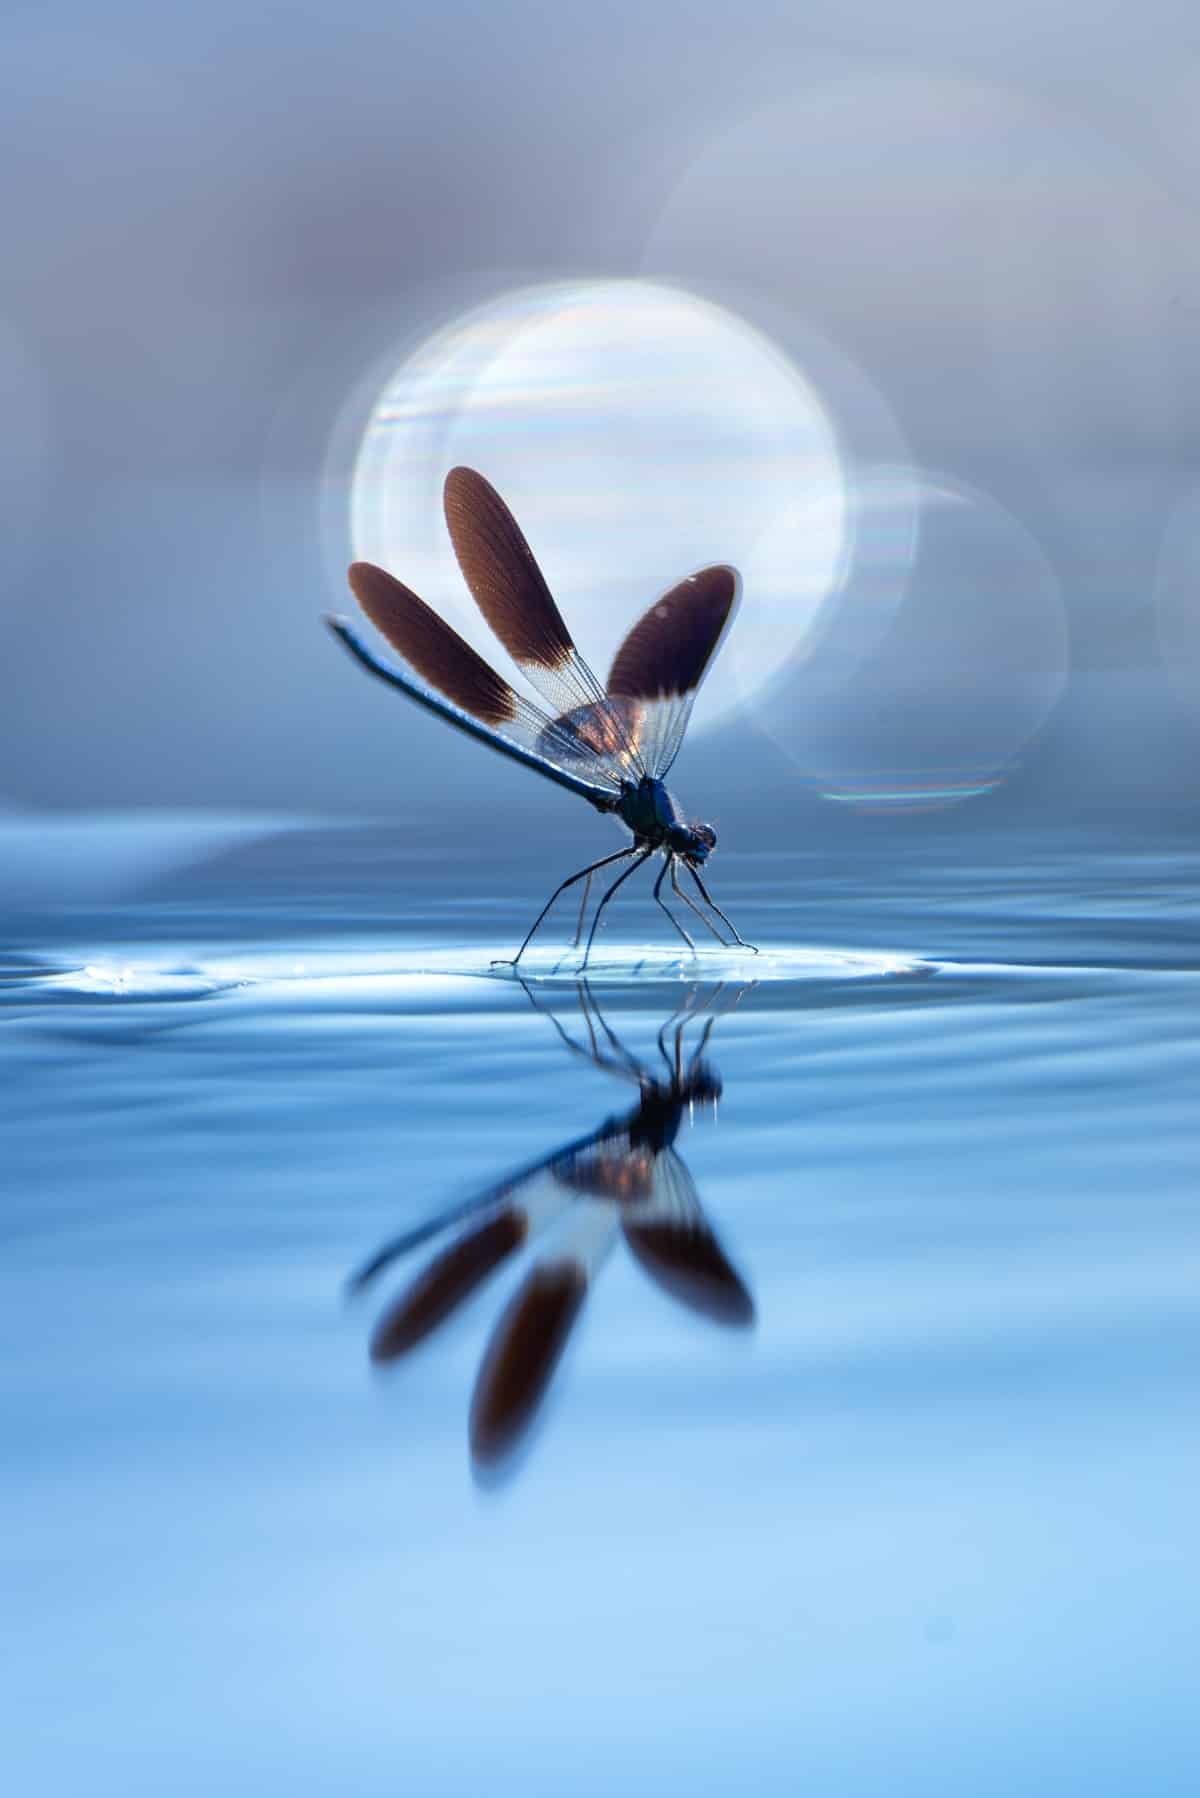 Dragonfly perching on the water